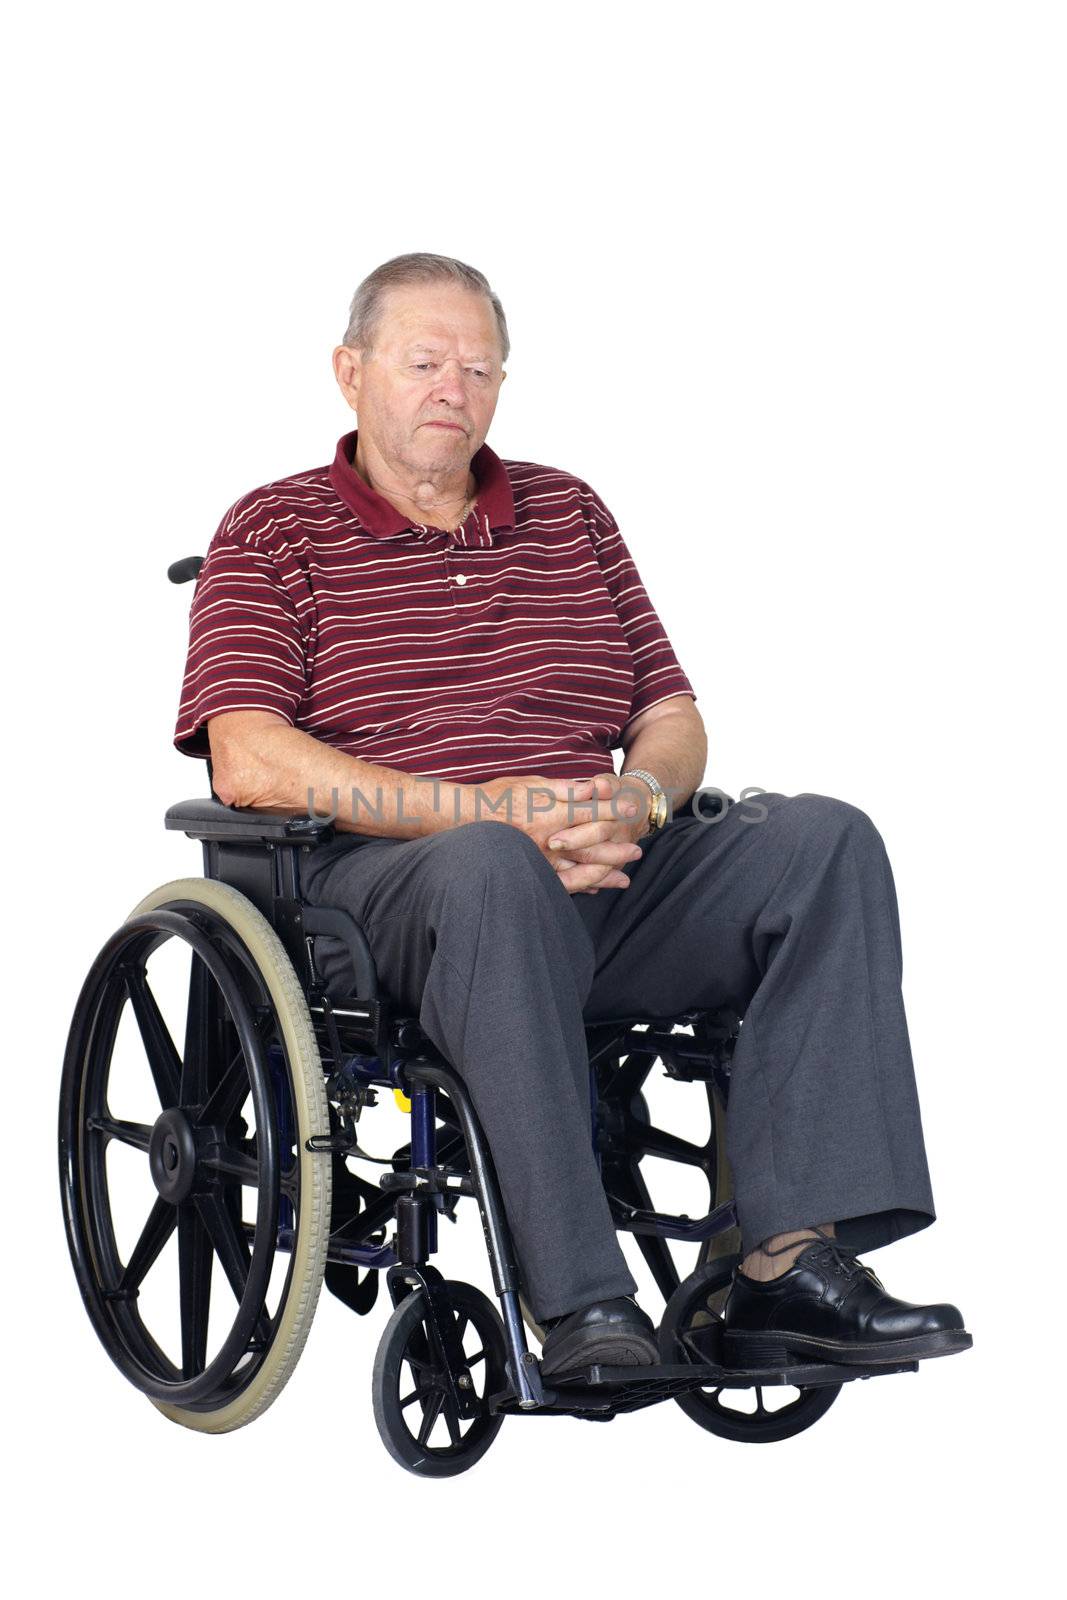 Sad or depressed senior man in a wheelchair, looking down, studio shot isolated over white background.